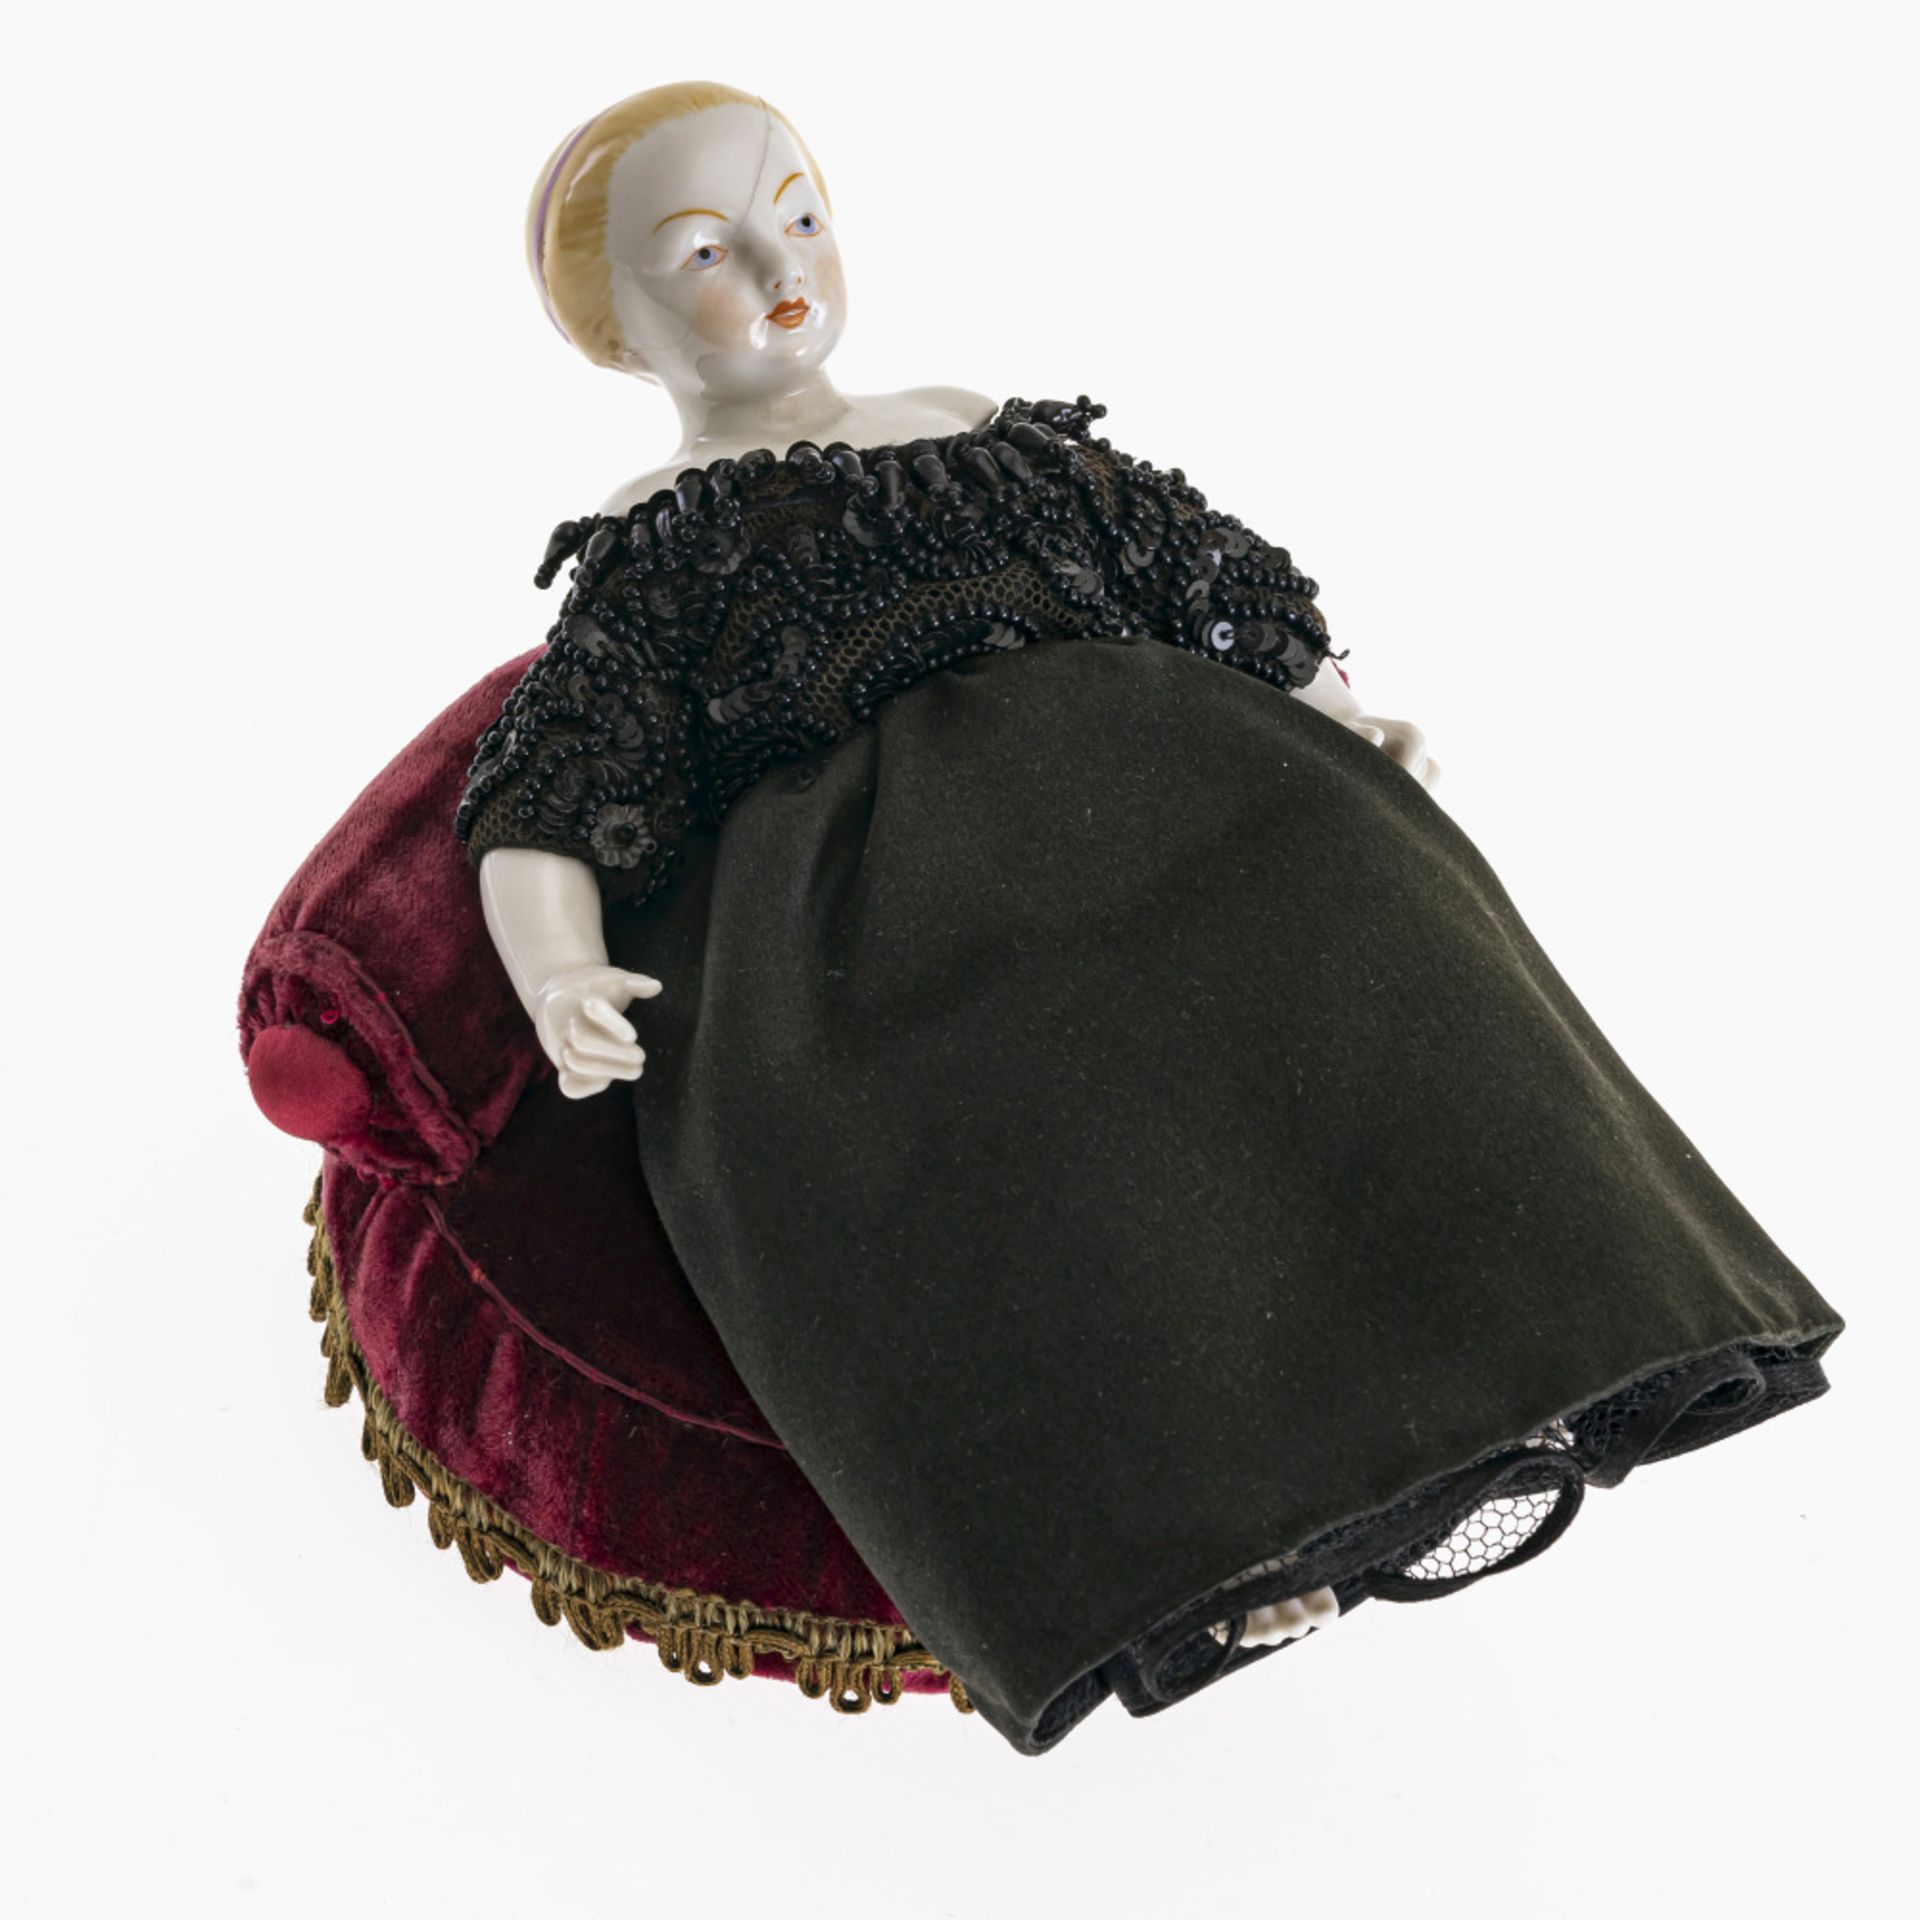 A doll (violinist) in ESCADA dress - Head, arms and legs from Nymphenburg, as of 1997. Later formati - Image 2 of 3